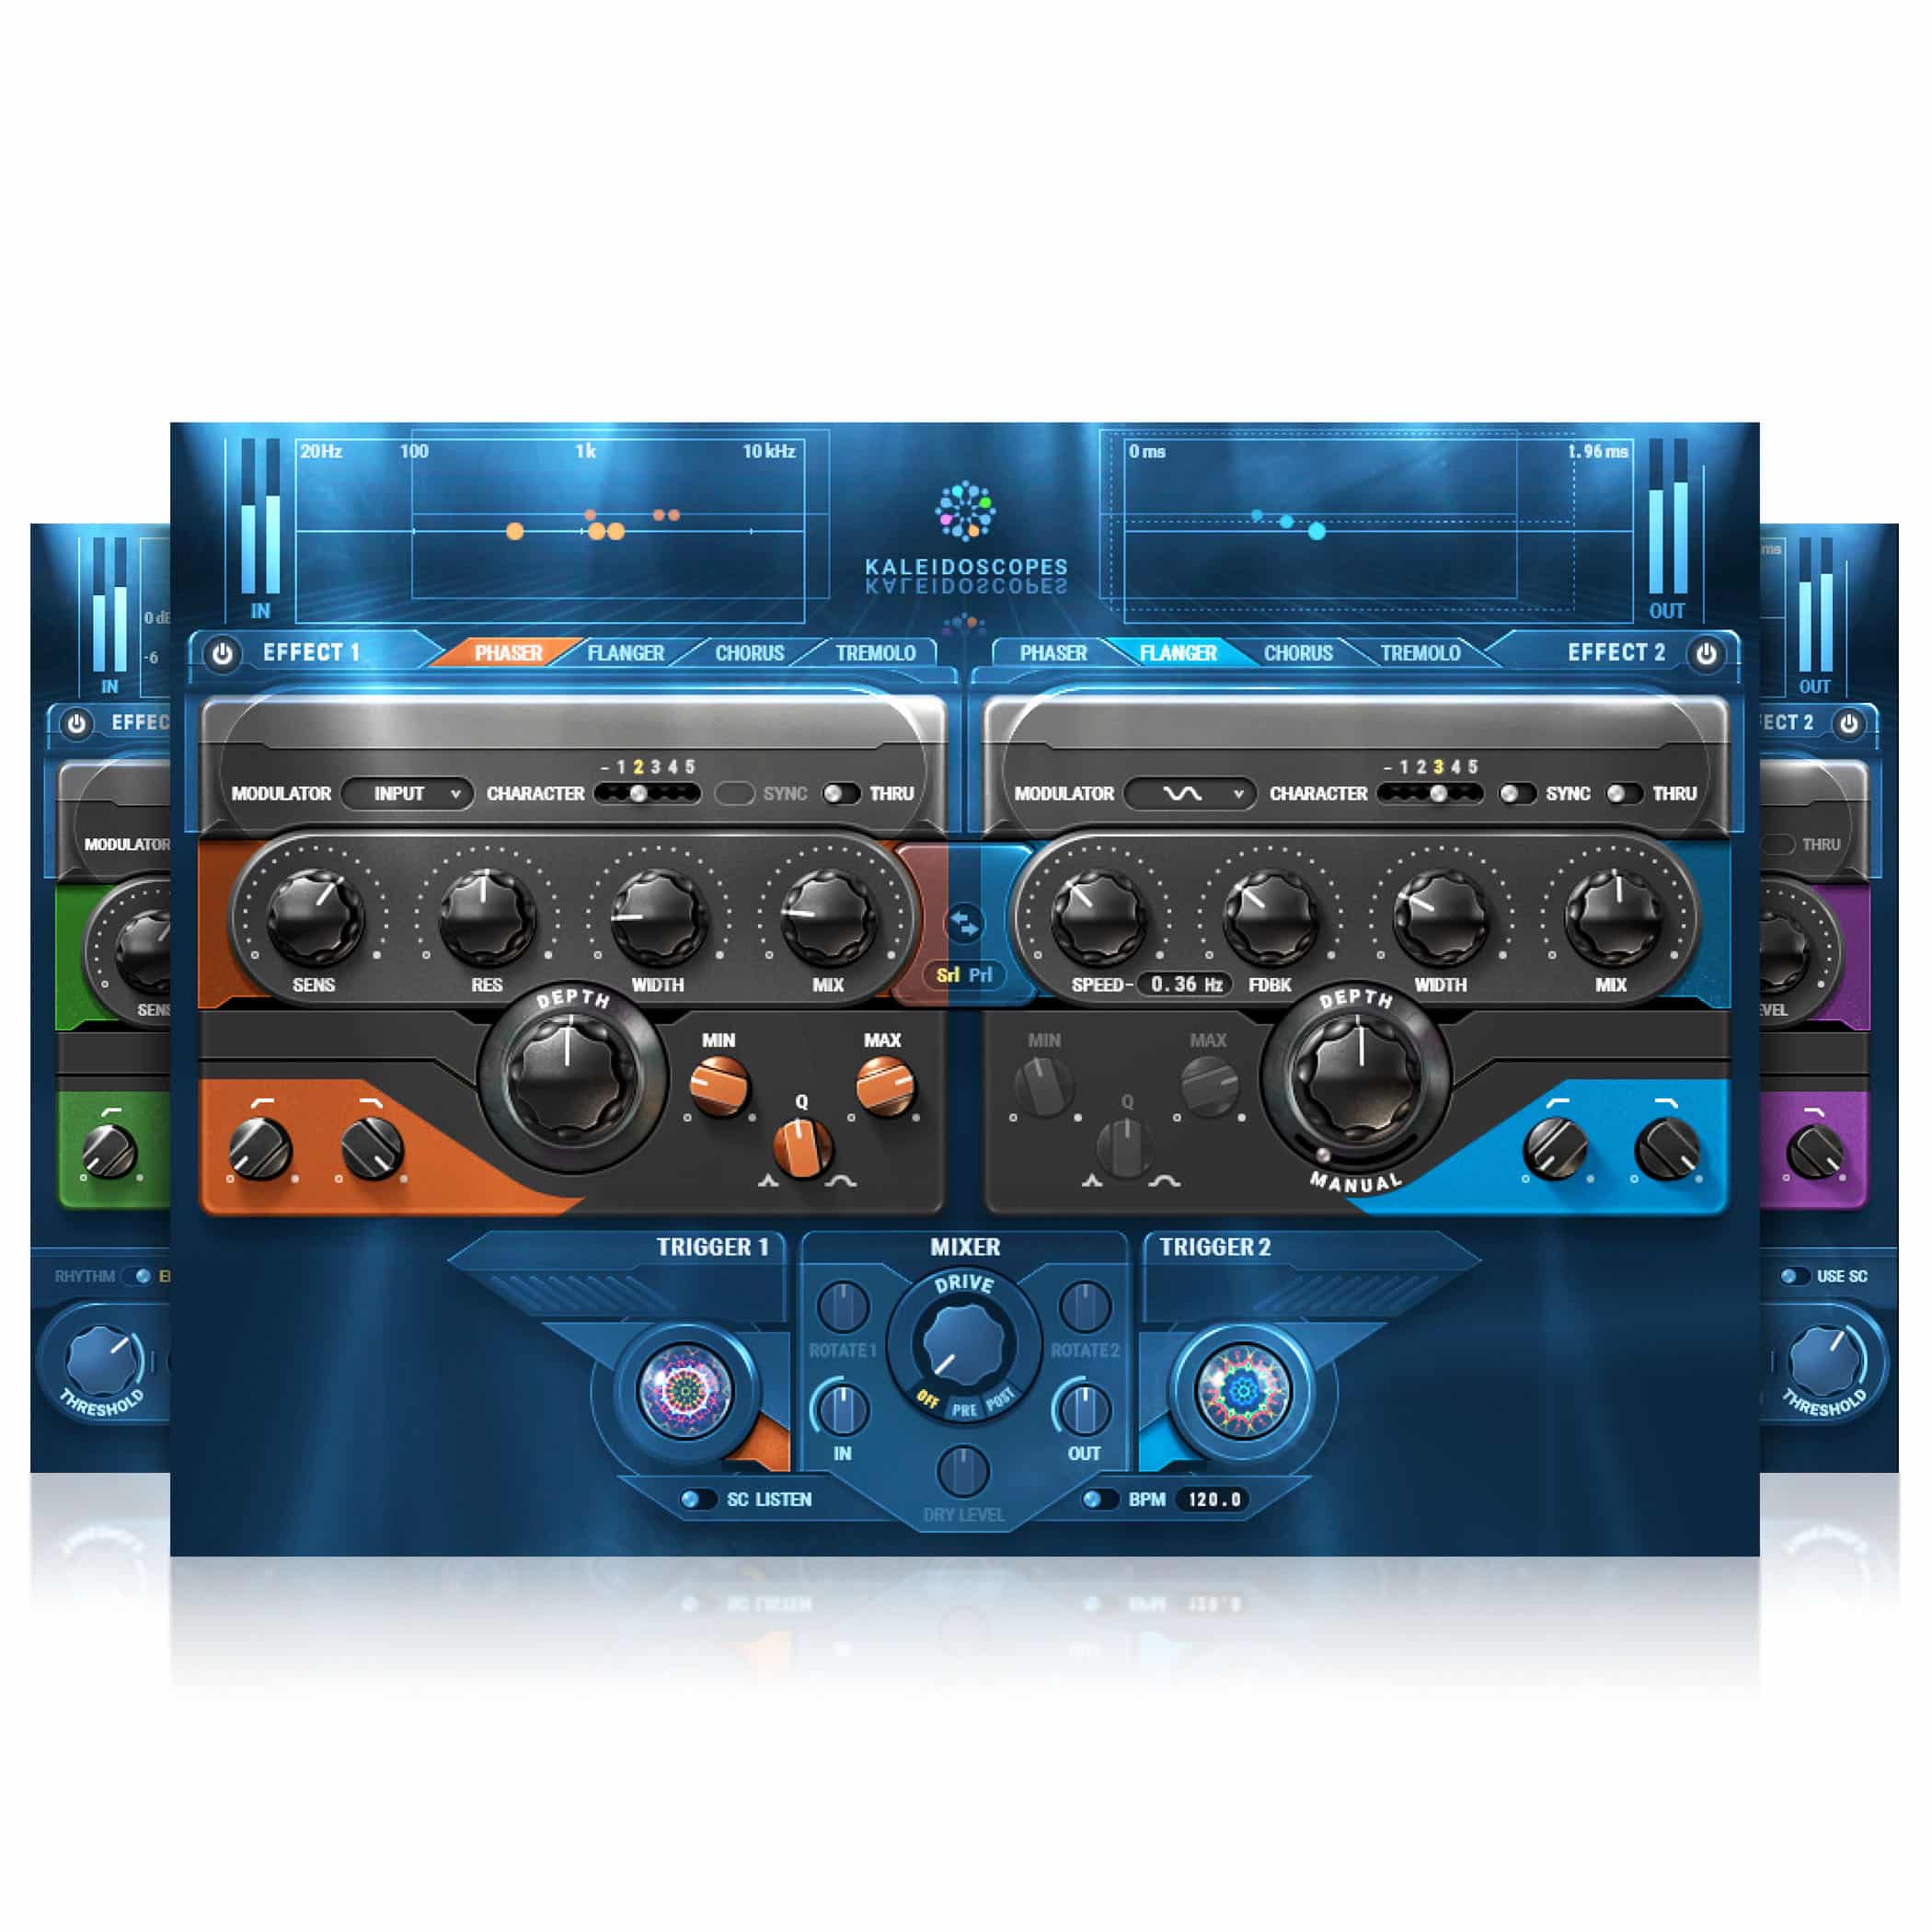 Waves Audio Introduces Kaleidoscopes, A Suite of Classic Effects For Your Next Recording Project